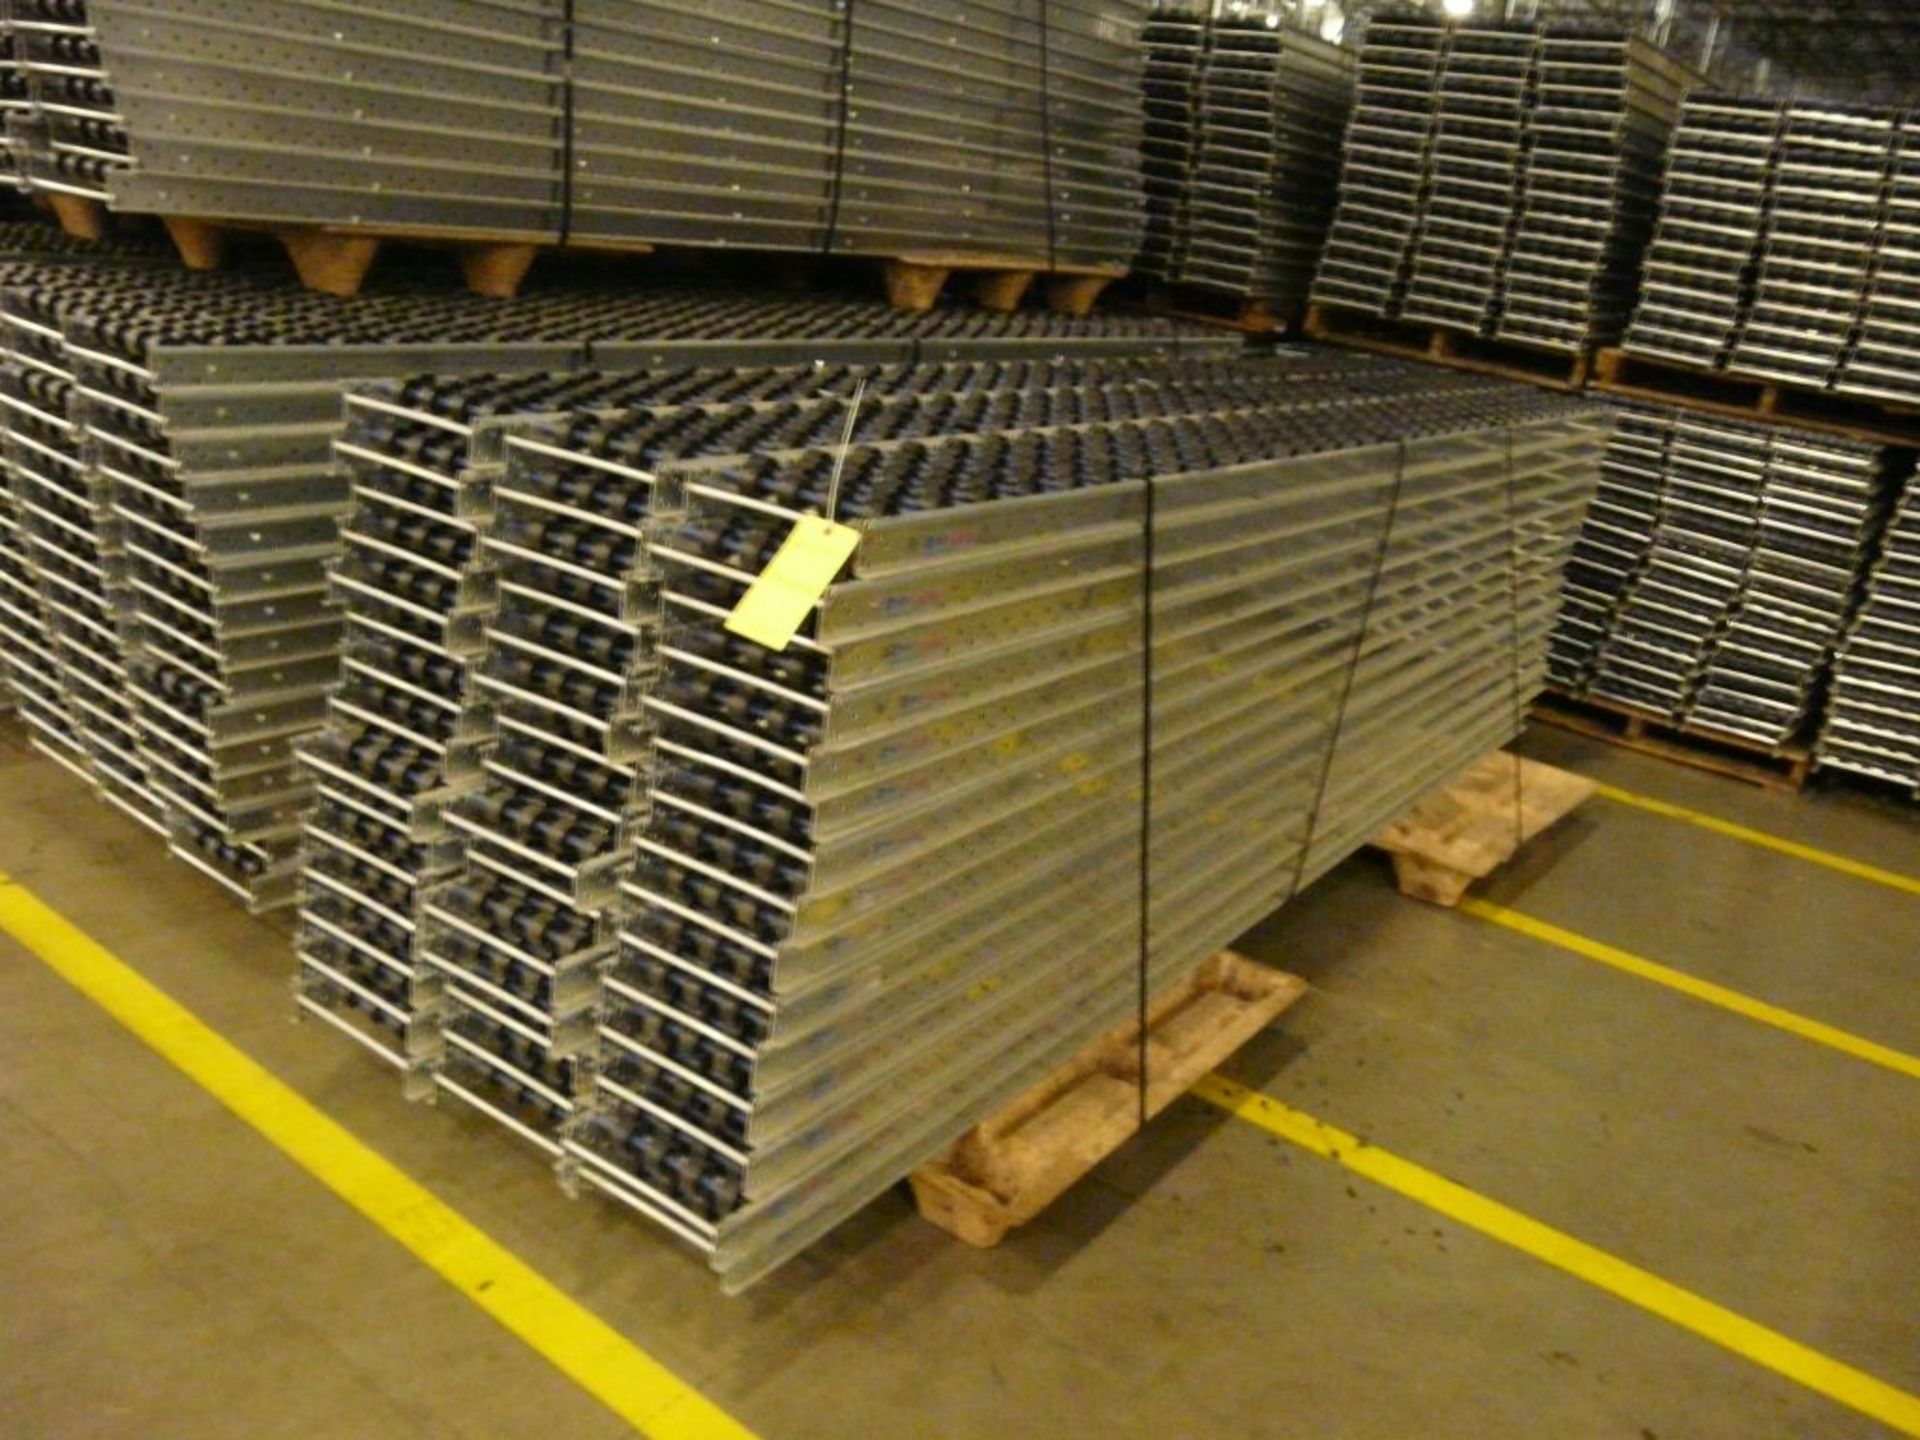 Lot of (90) SpanTrack Wheelbed Carton Flow Conveyors - 11.5'L x 11"W; Tag: 224198 - $30 Lot